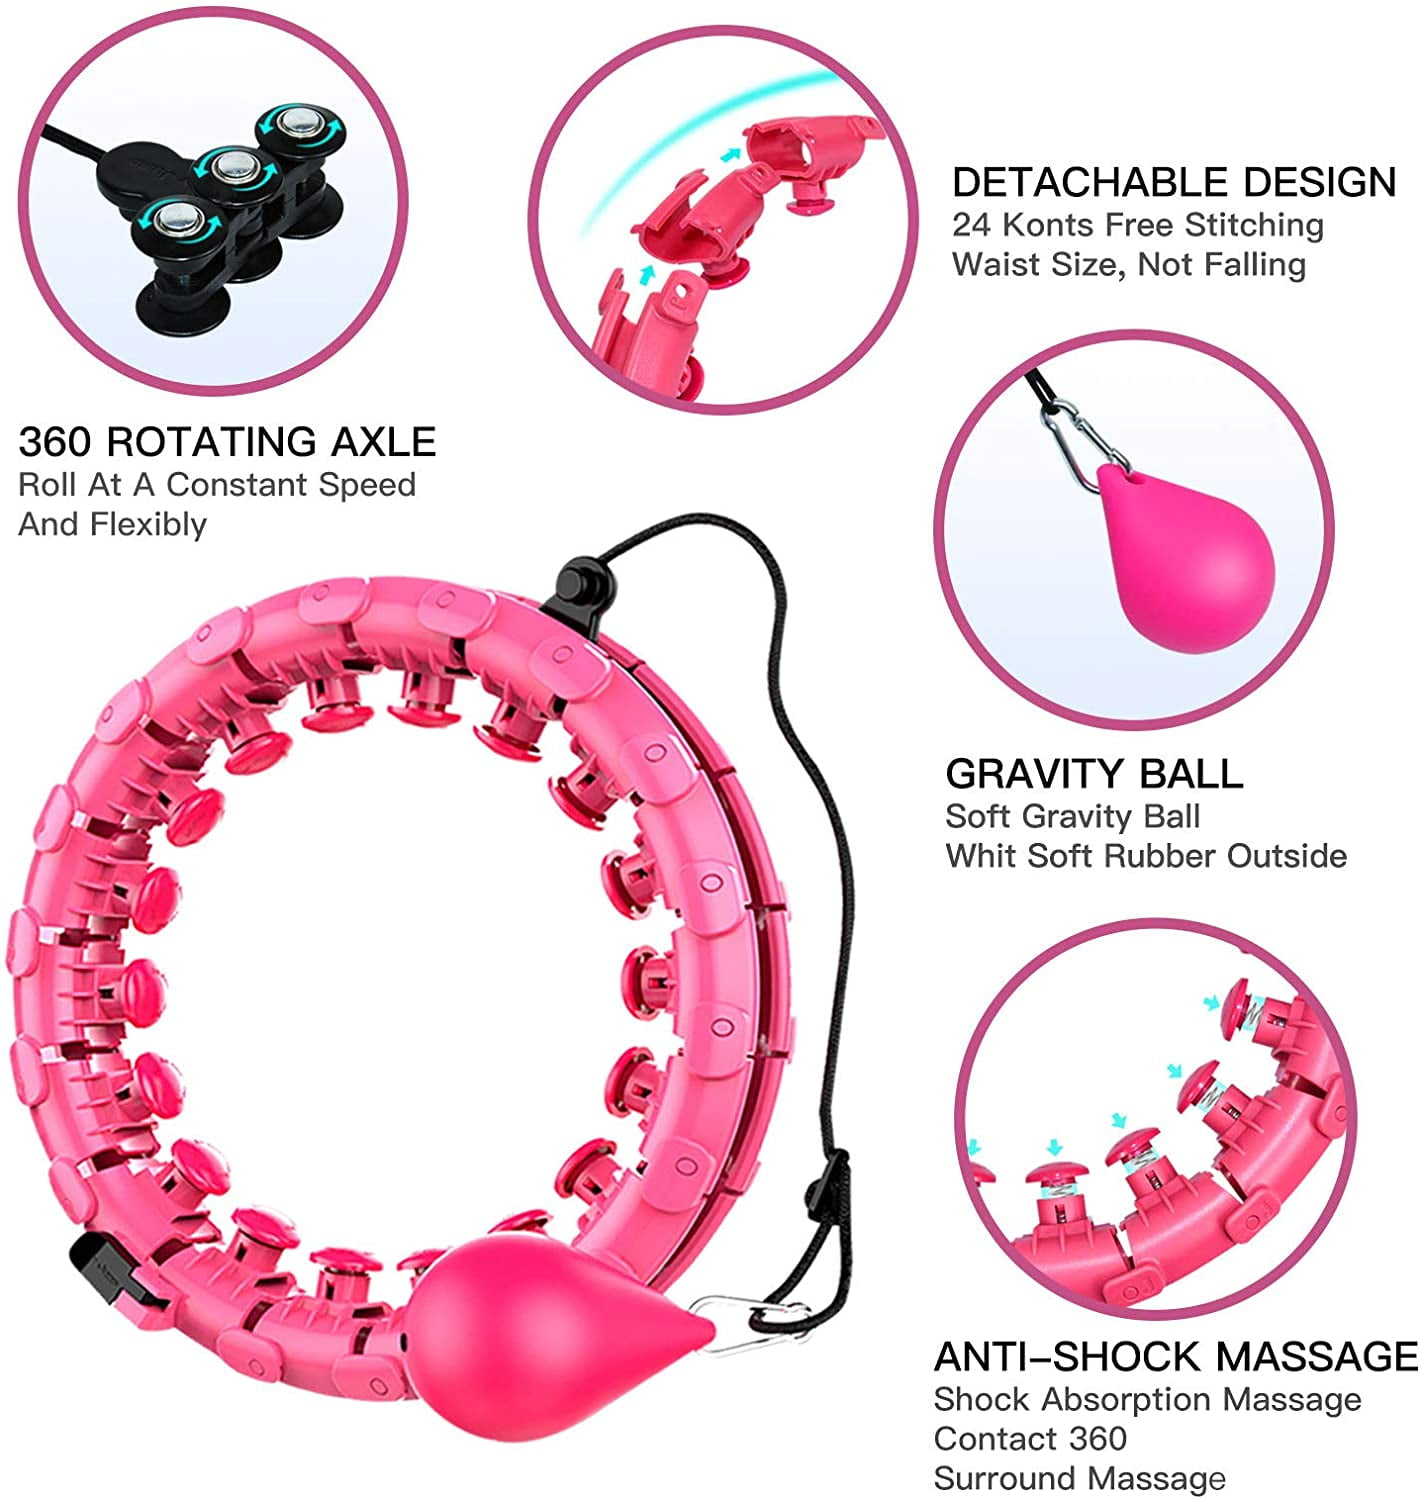 Ghazalla smart weighted hula hoop with massage ball is best workout equipment This weighted hula hoop 5lb reduce your weight in every month 24 Detachable Knots Adjustable Auto-Spinning Ball for Adult 